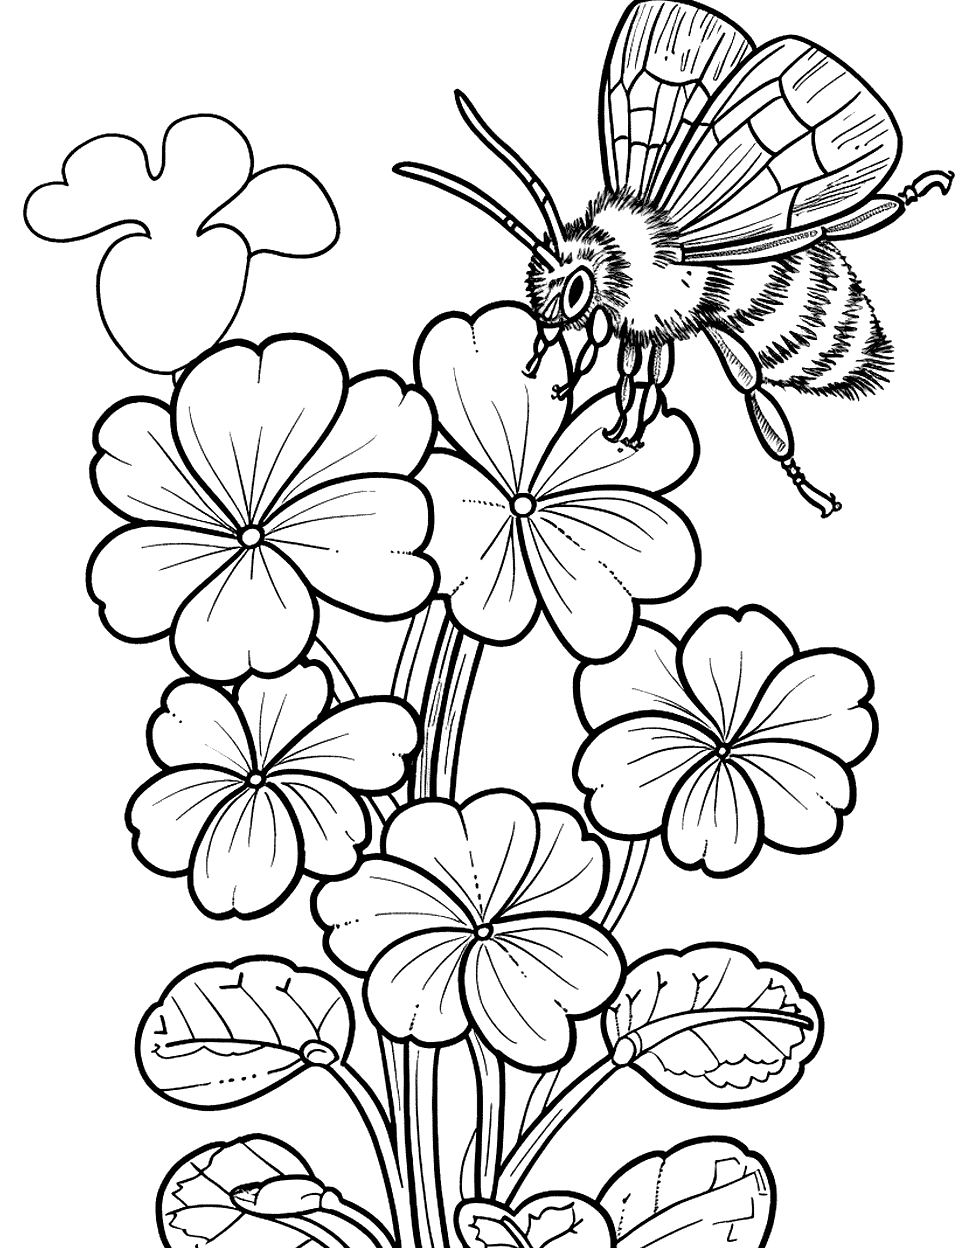 Bee Pollinating Shamrock Flowers Coloring Page - A bee busily pollinating small shamrock flowers in a garden.